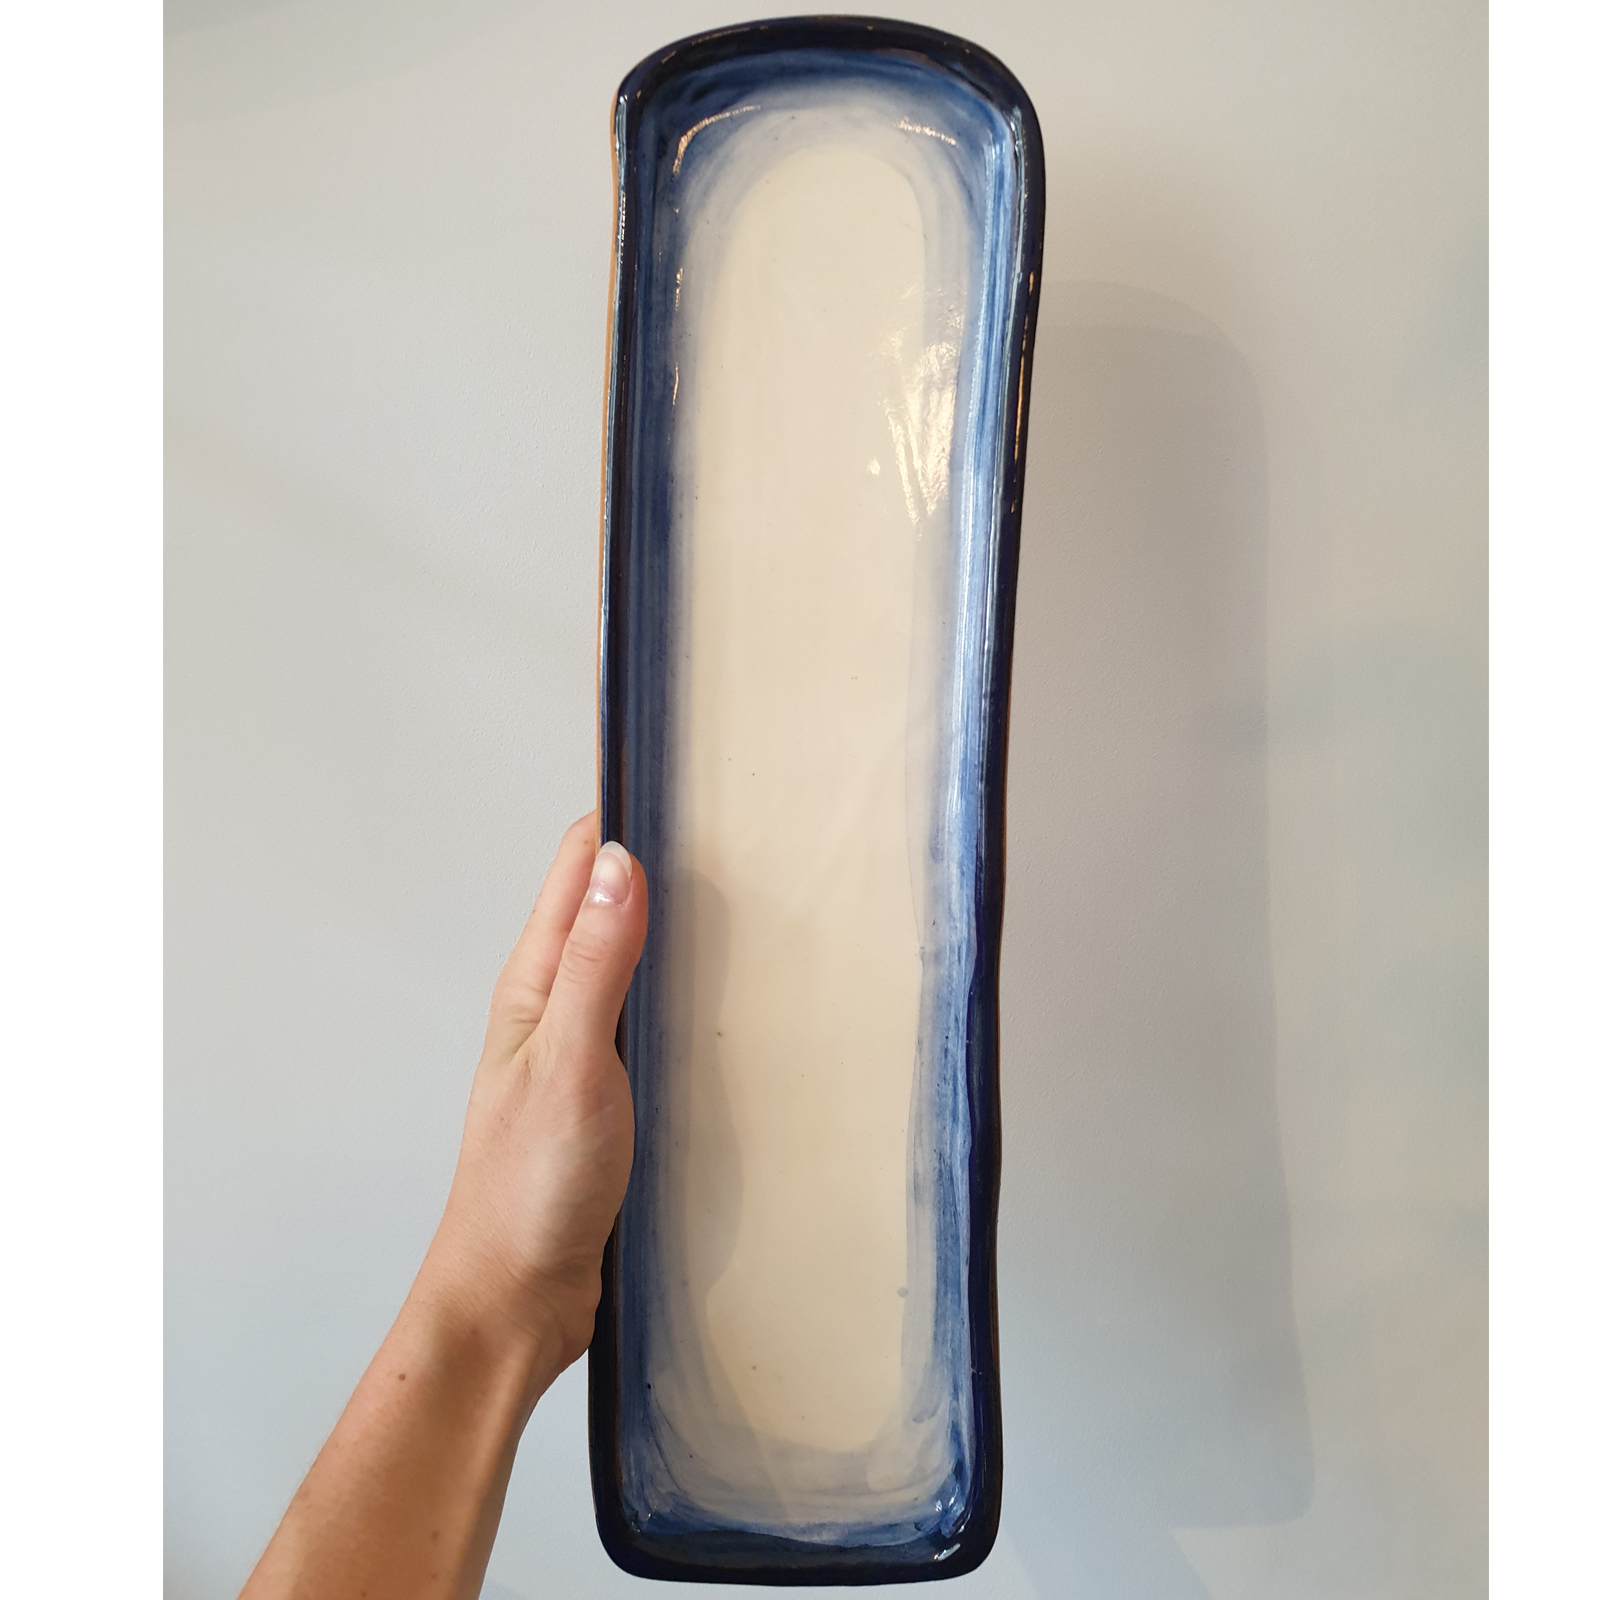 Indor – Canapes Platter New Lower Price – Serving Dish